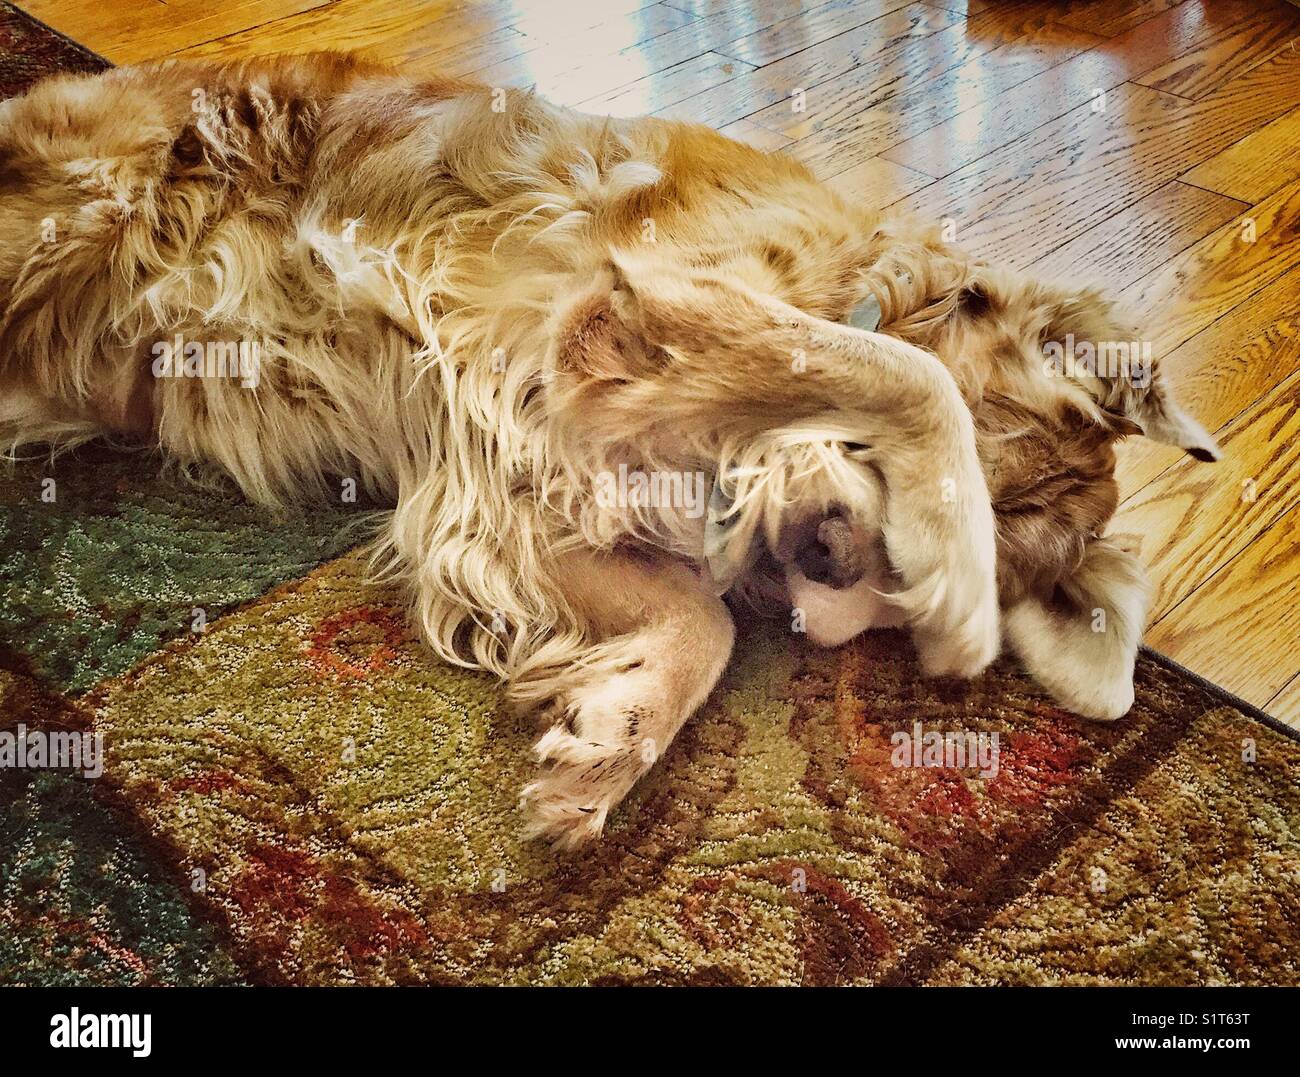 Golden retriever dog covering eyes with paw while laying on floor Stock Photo